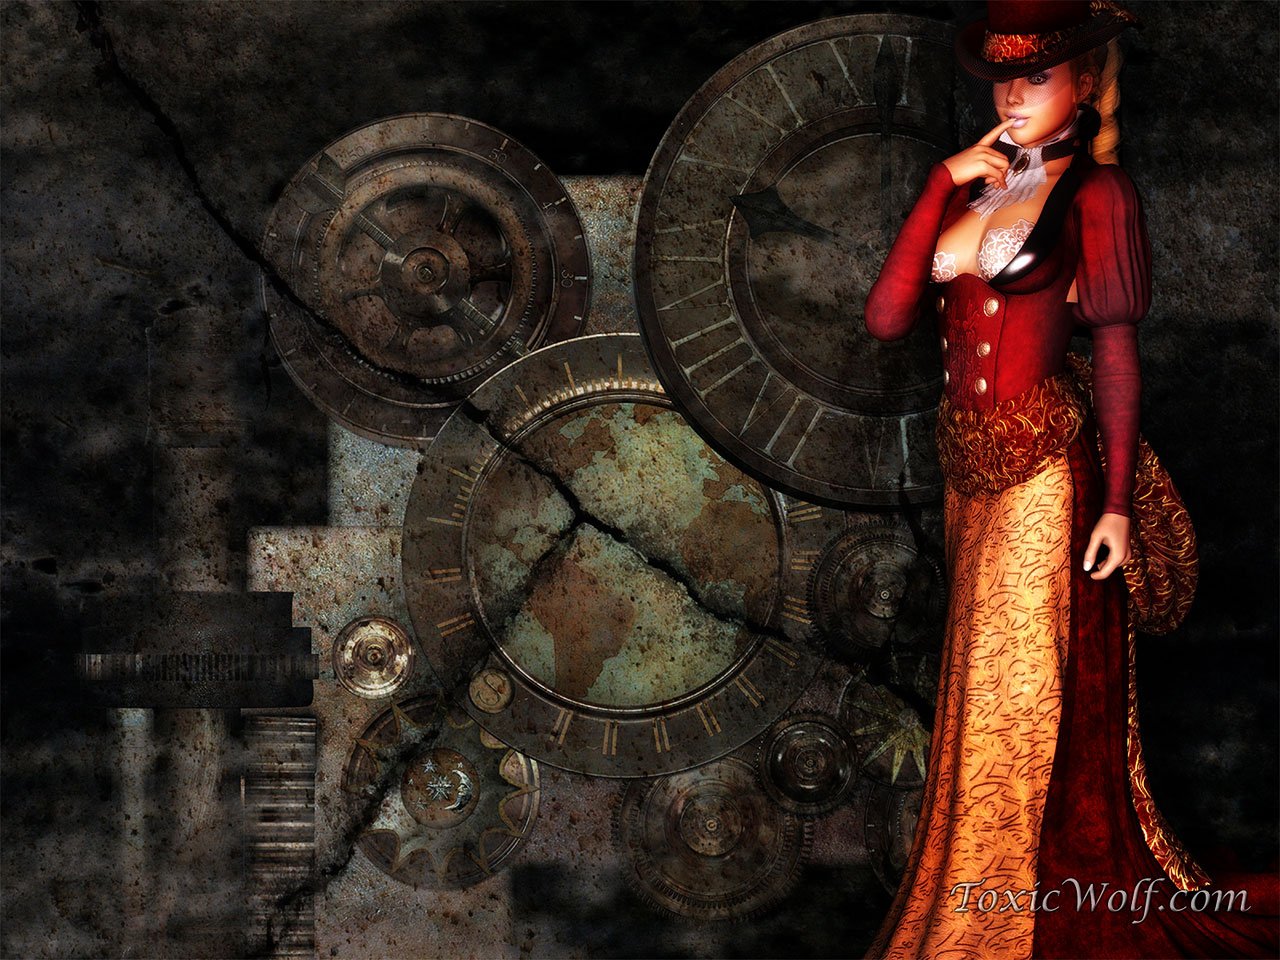 1000 images about Steampunk onSteampunk